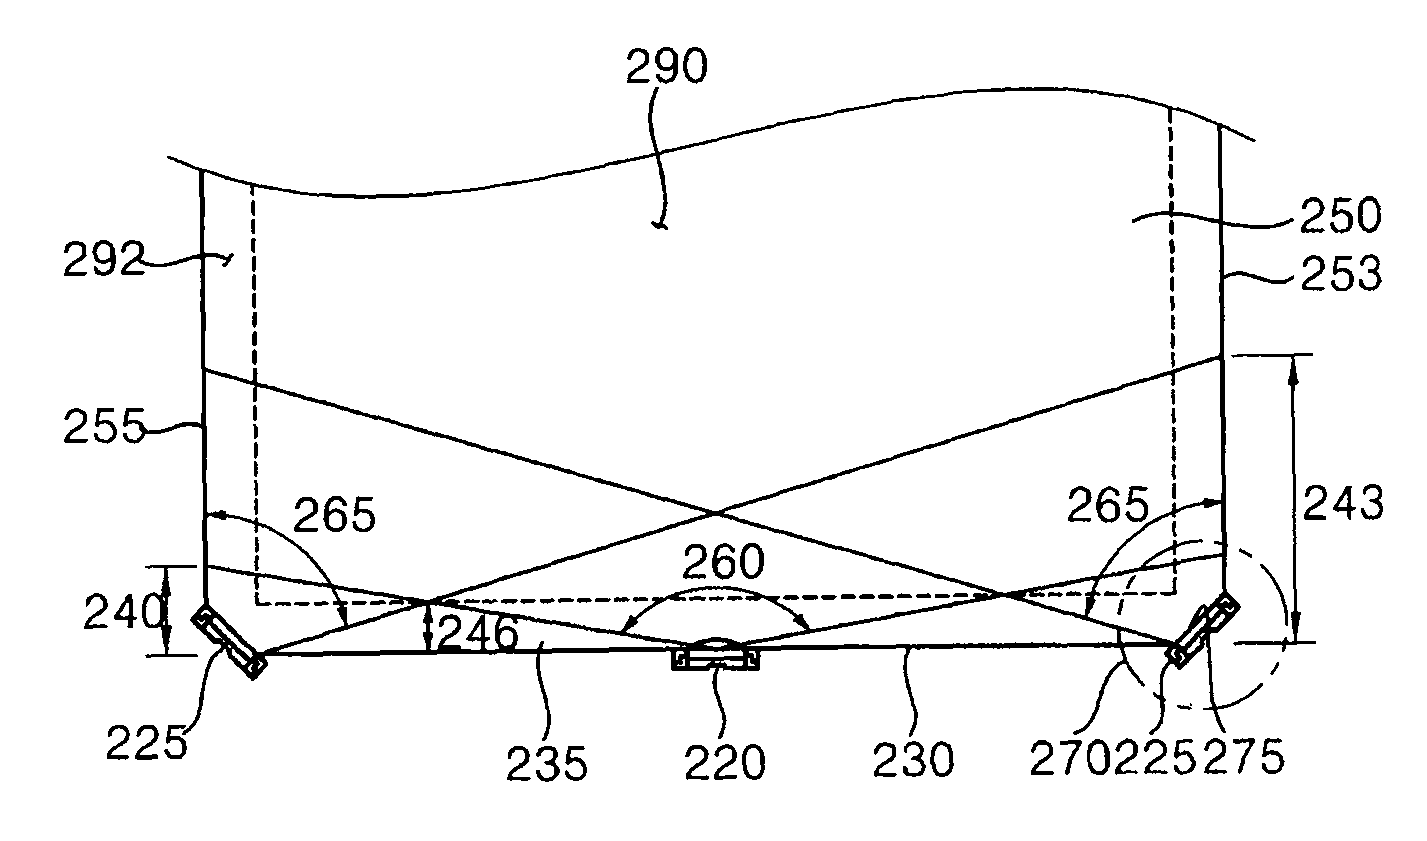 Liquid crystal display using different light radiation angles of light emitting diodes